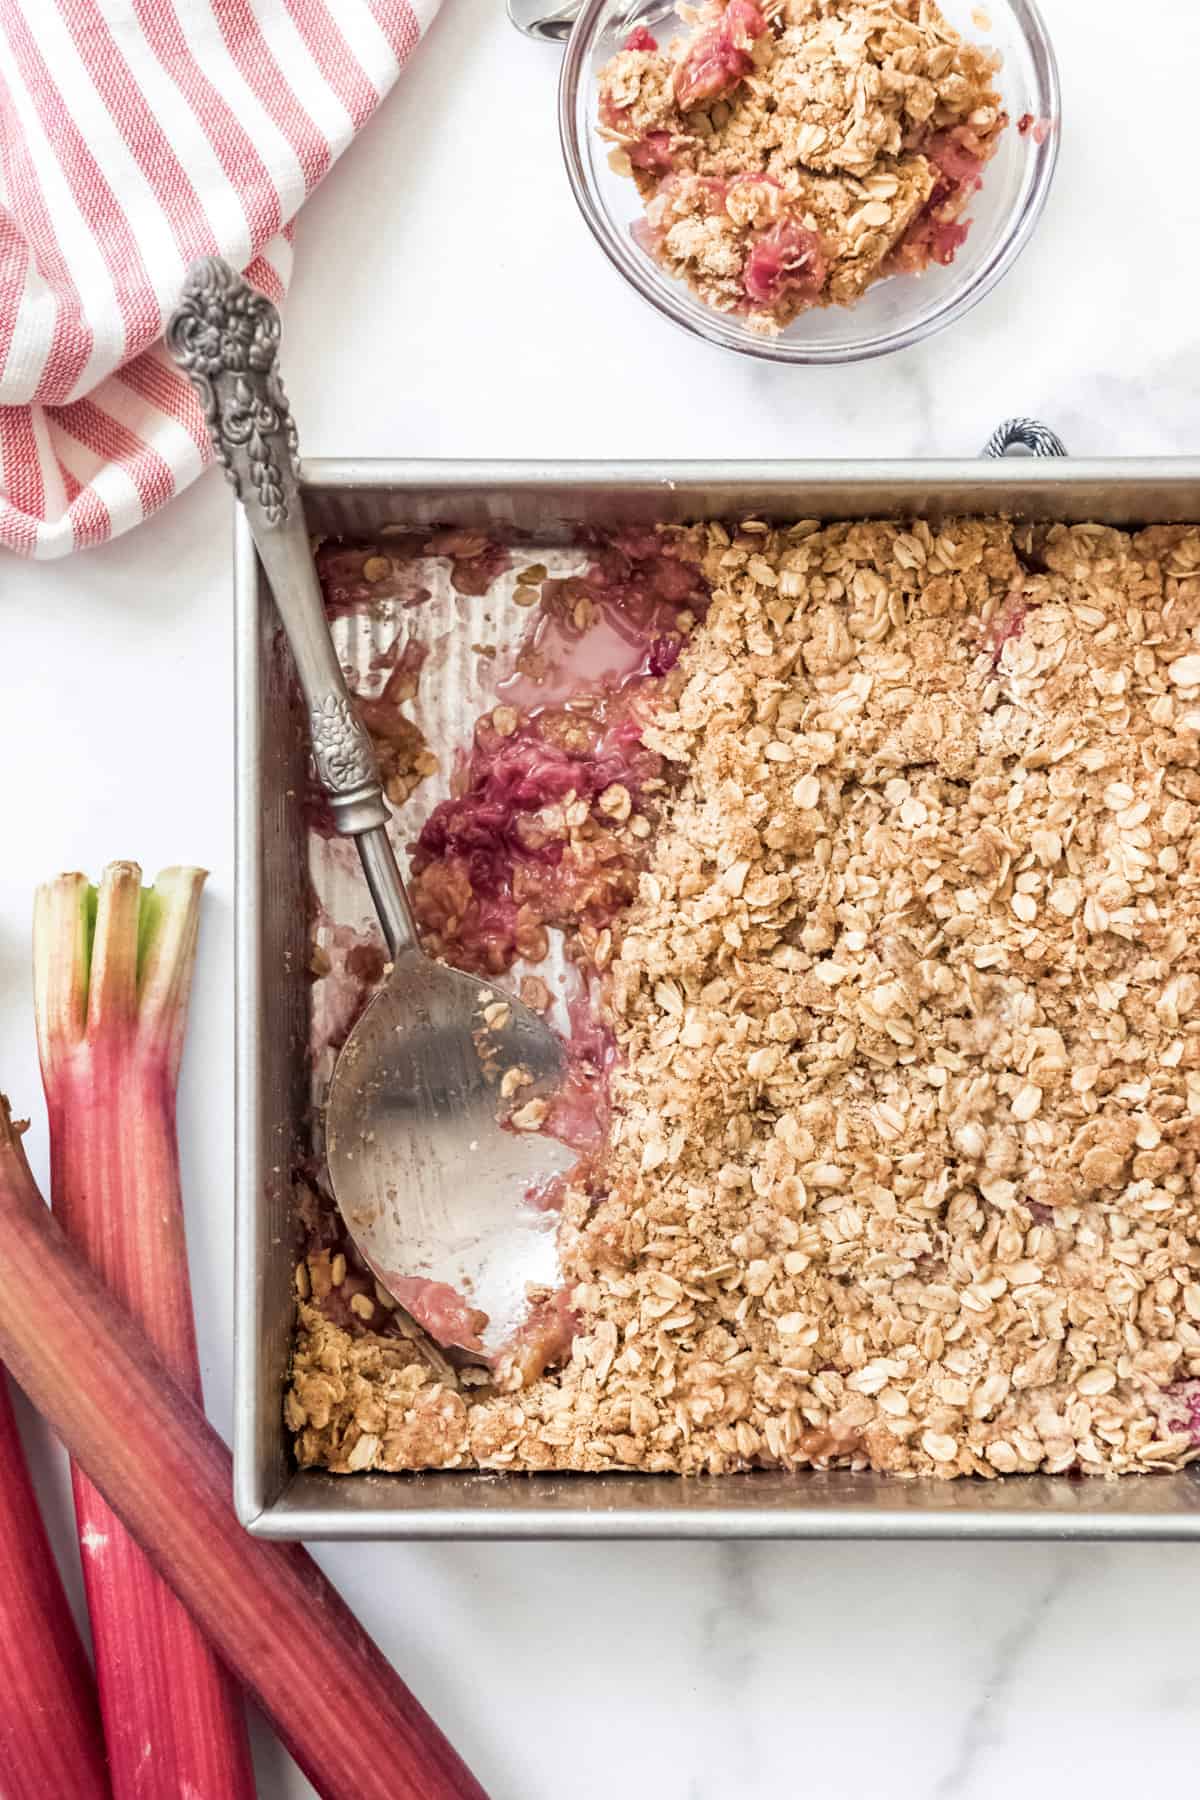 A baking dish with rhubarb crisp and a large serving spoon.